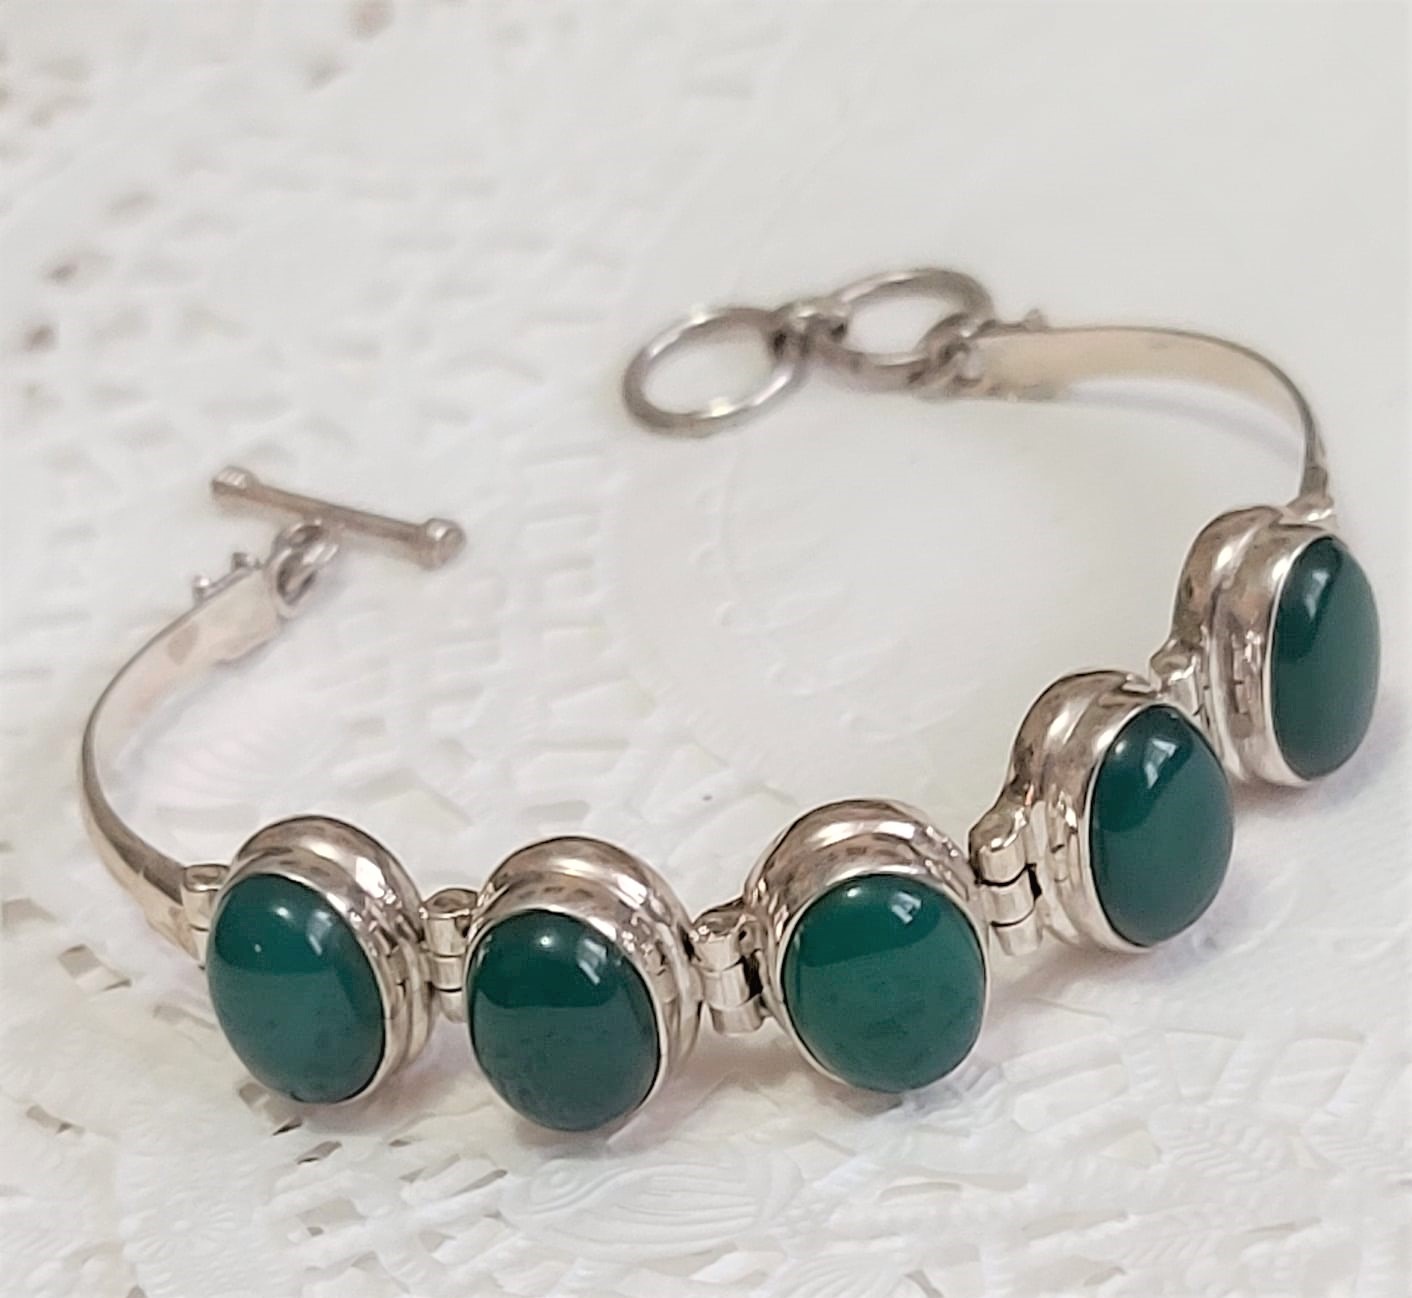 Green Onyx and 925 Sterling Silver Bracelet - Click Image to Close